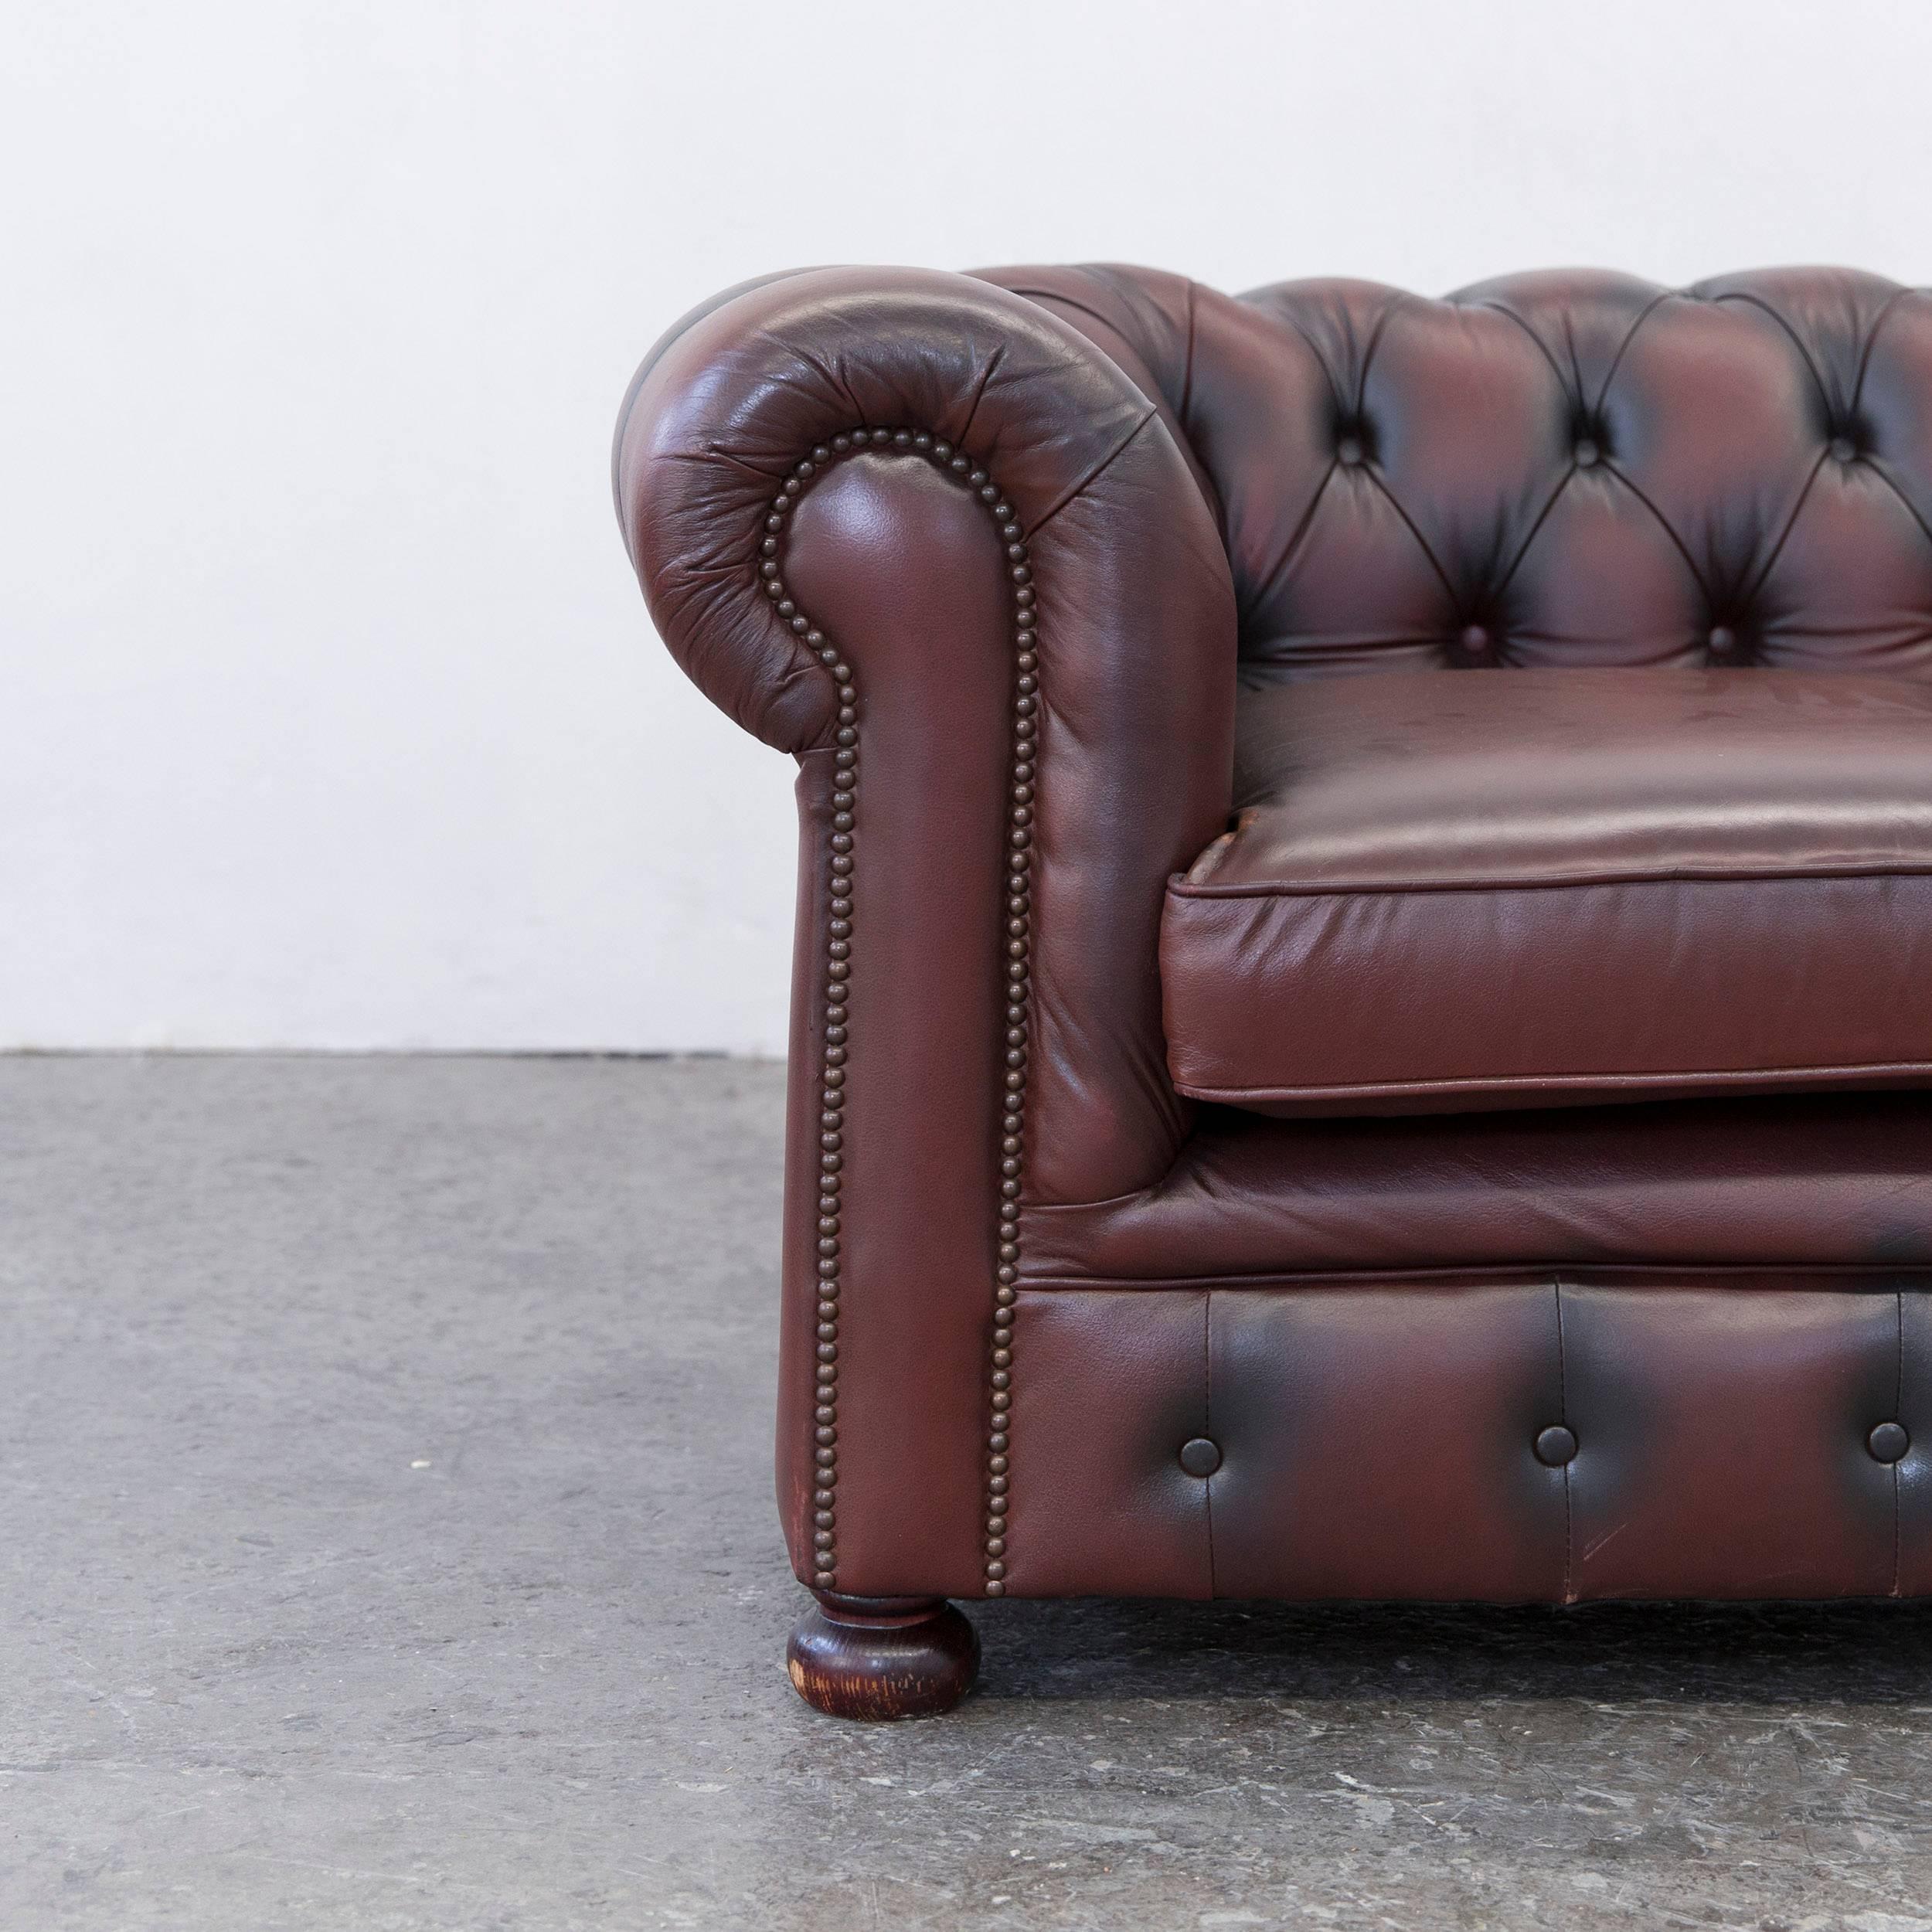 Authentic chesterfield two-seat couch in brown-red colored leather.